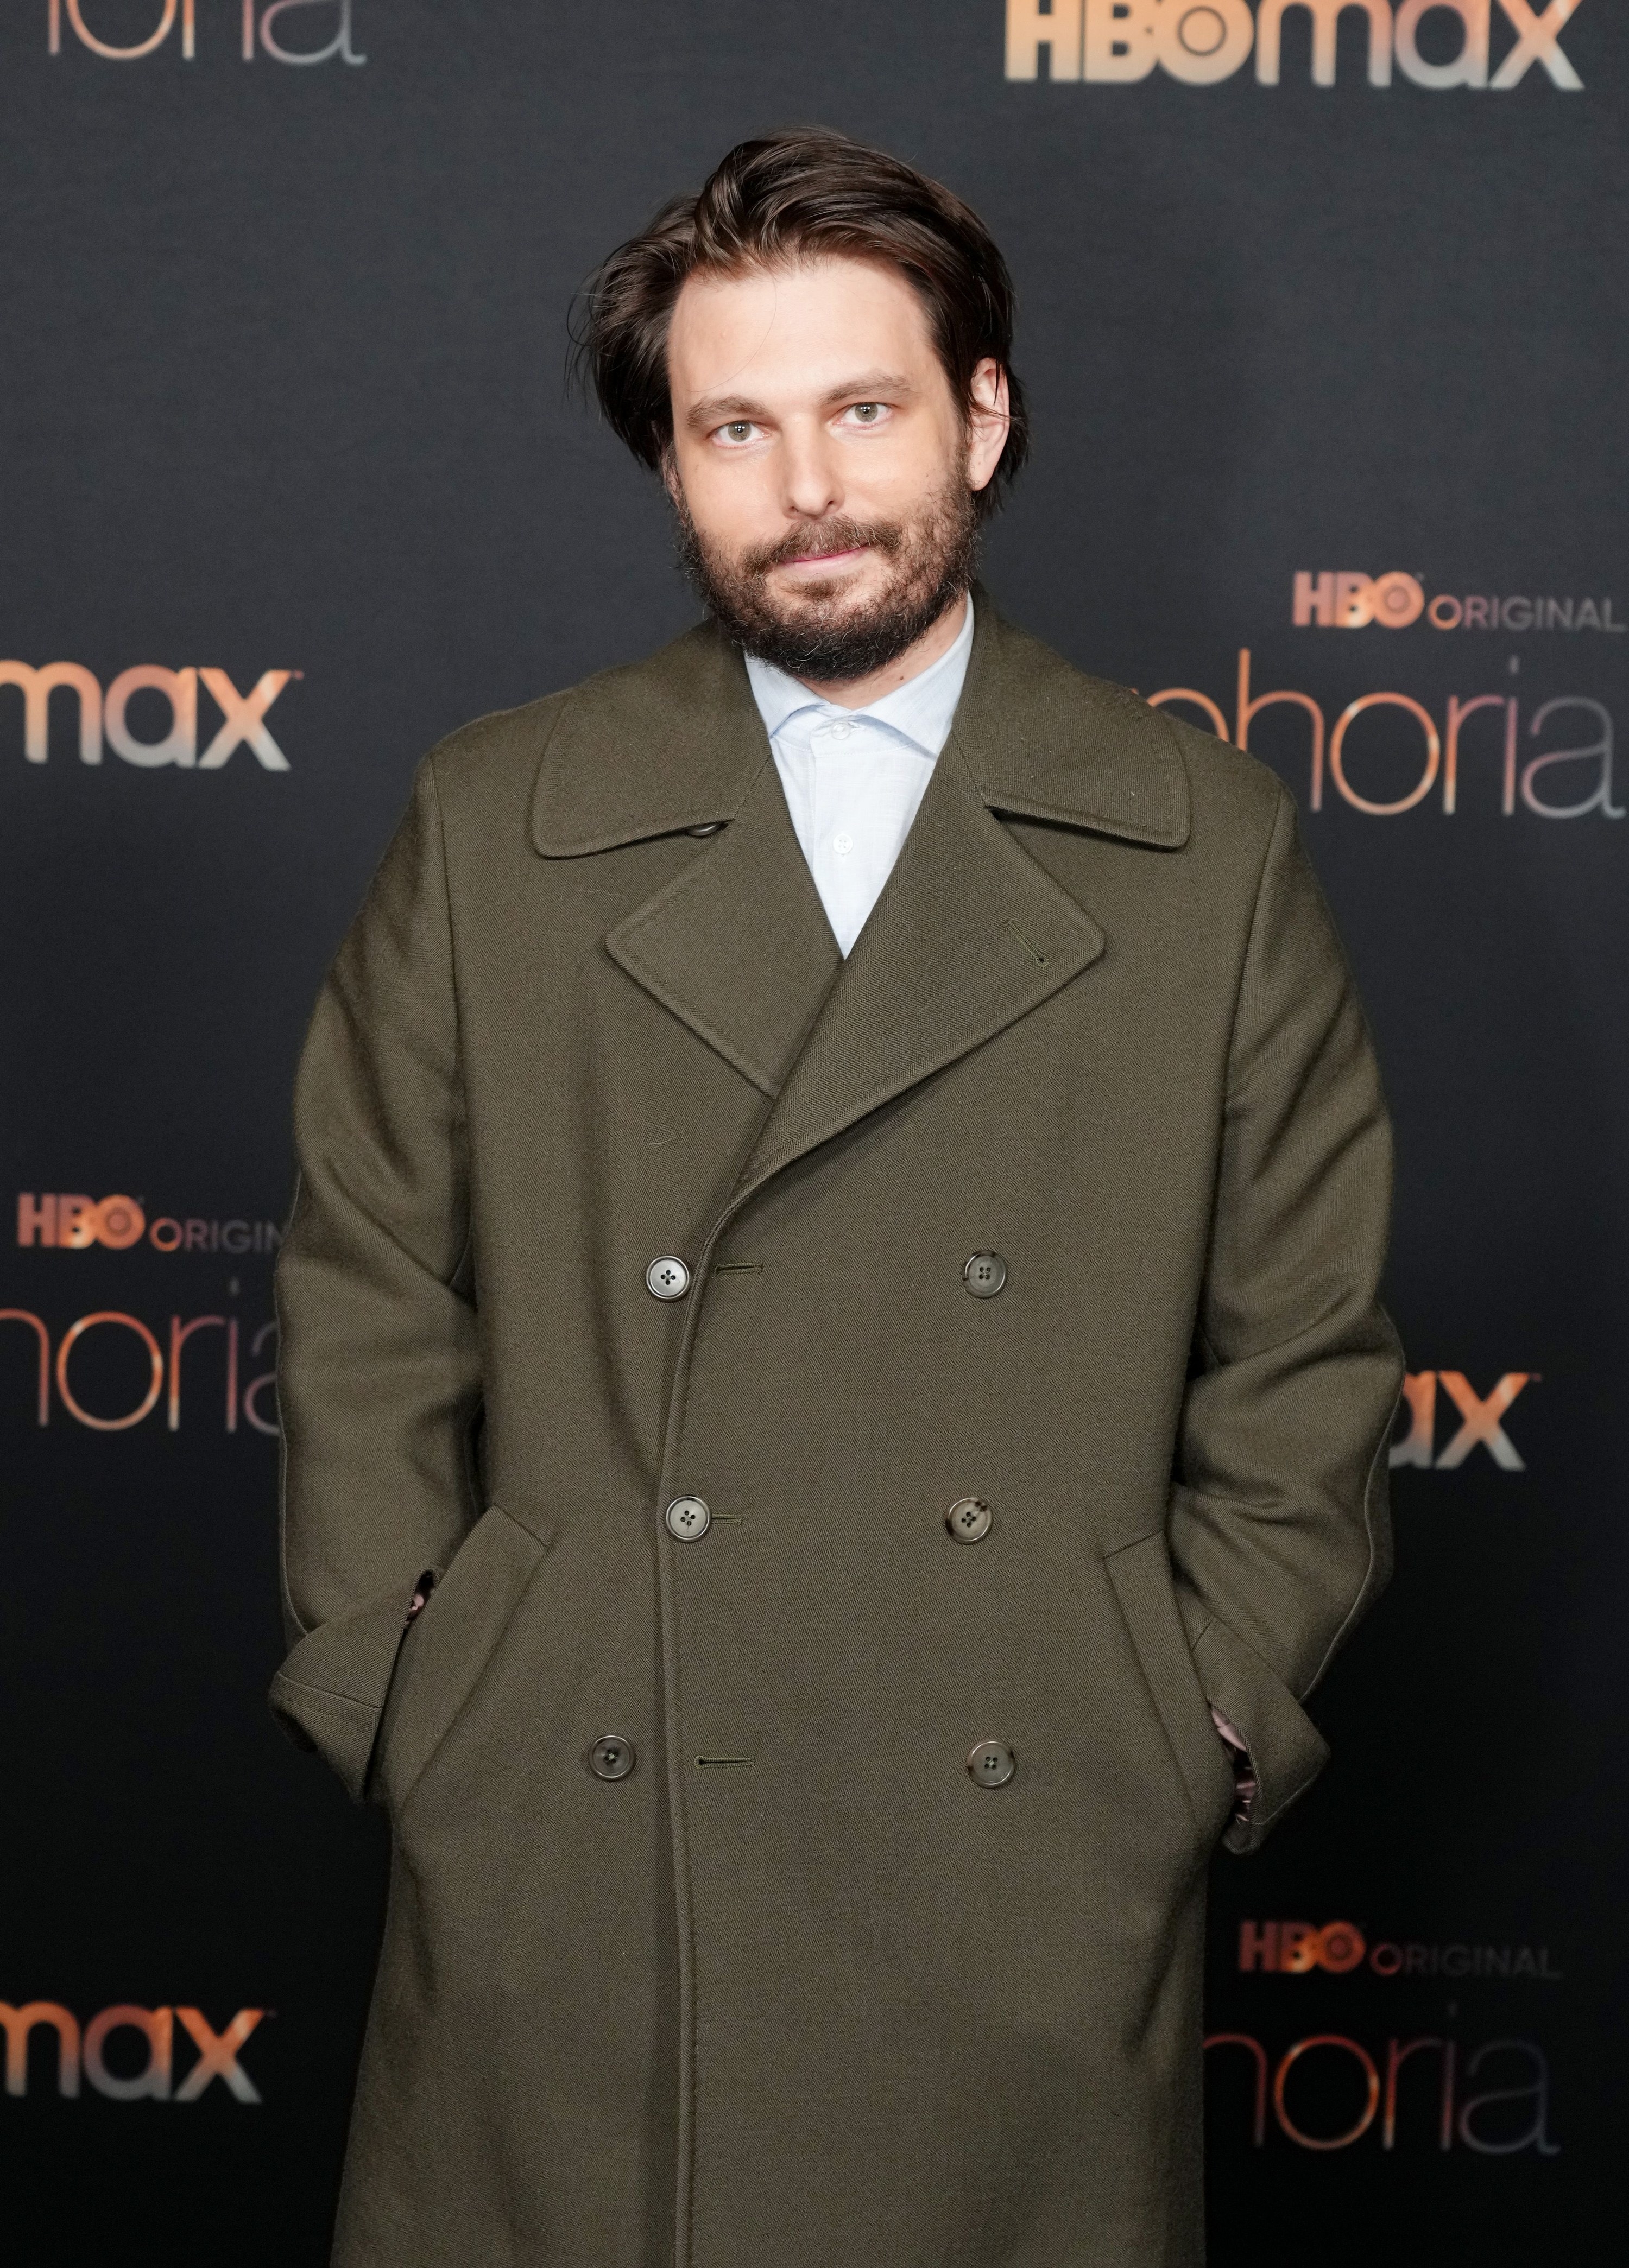 A closeup of Sam Levinson at a Euphoria event wearing a long coat with his hands in his pocket